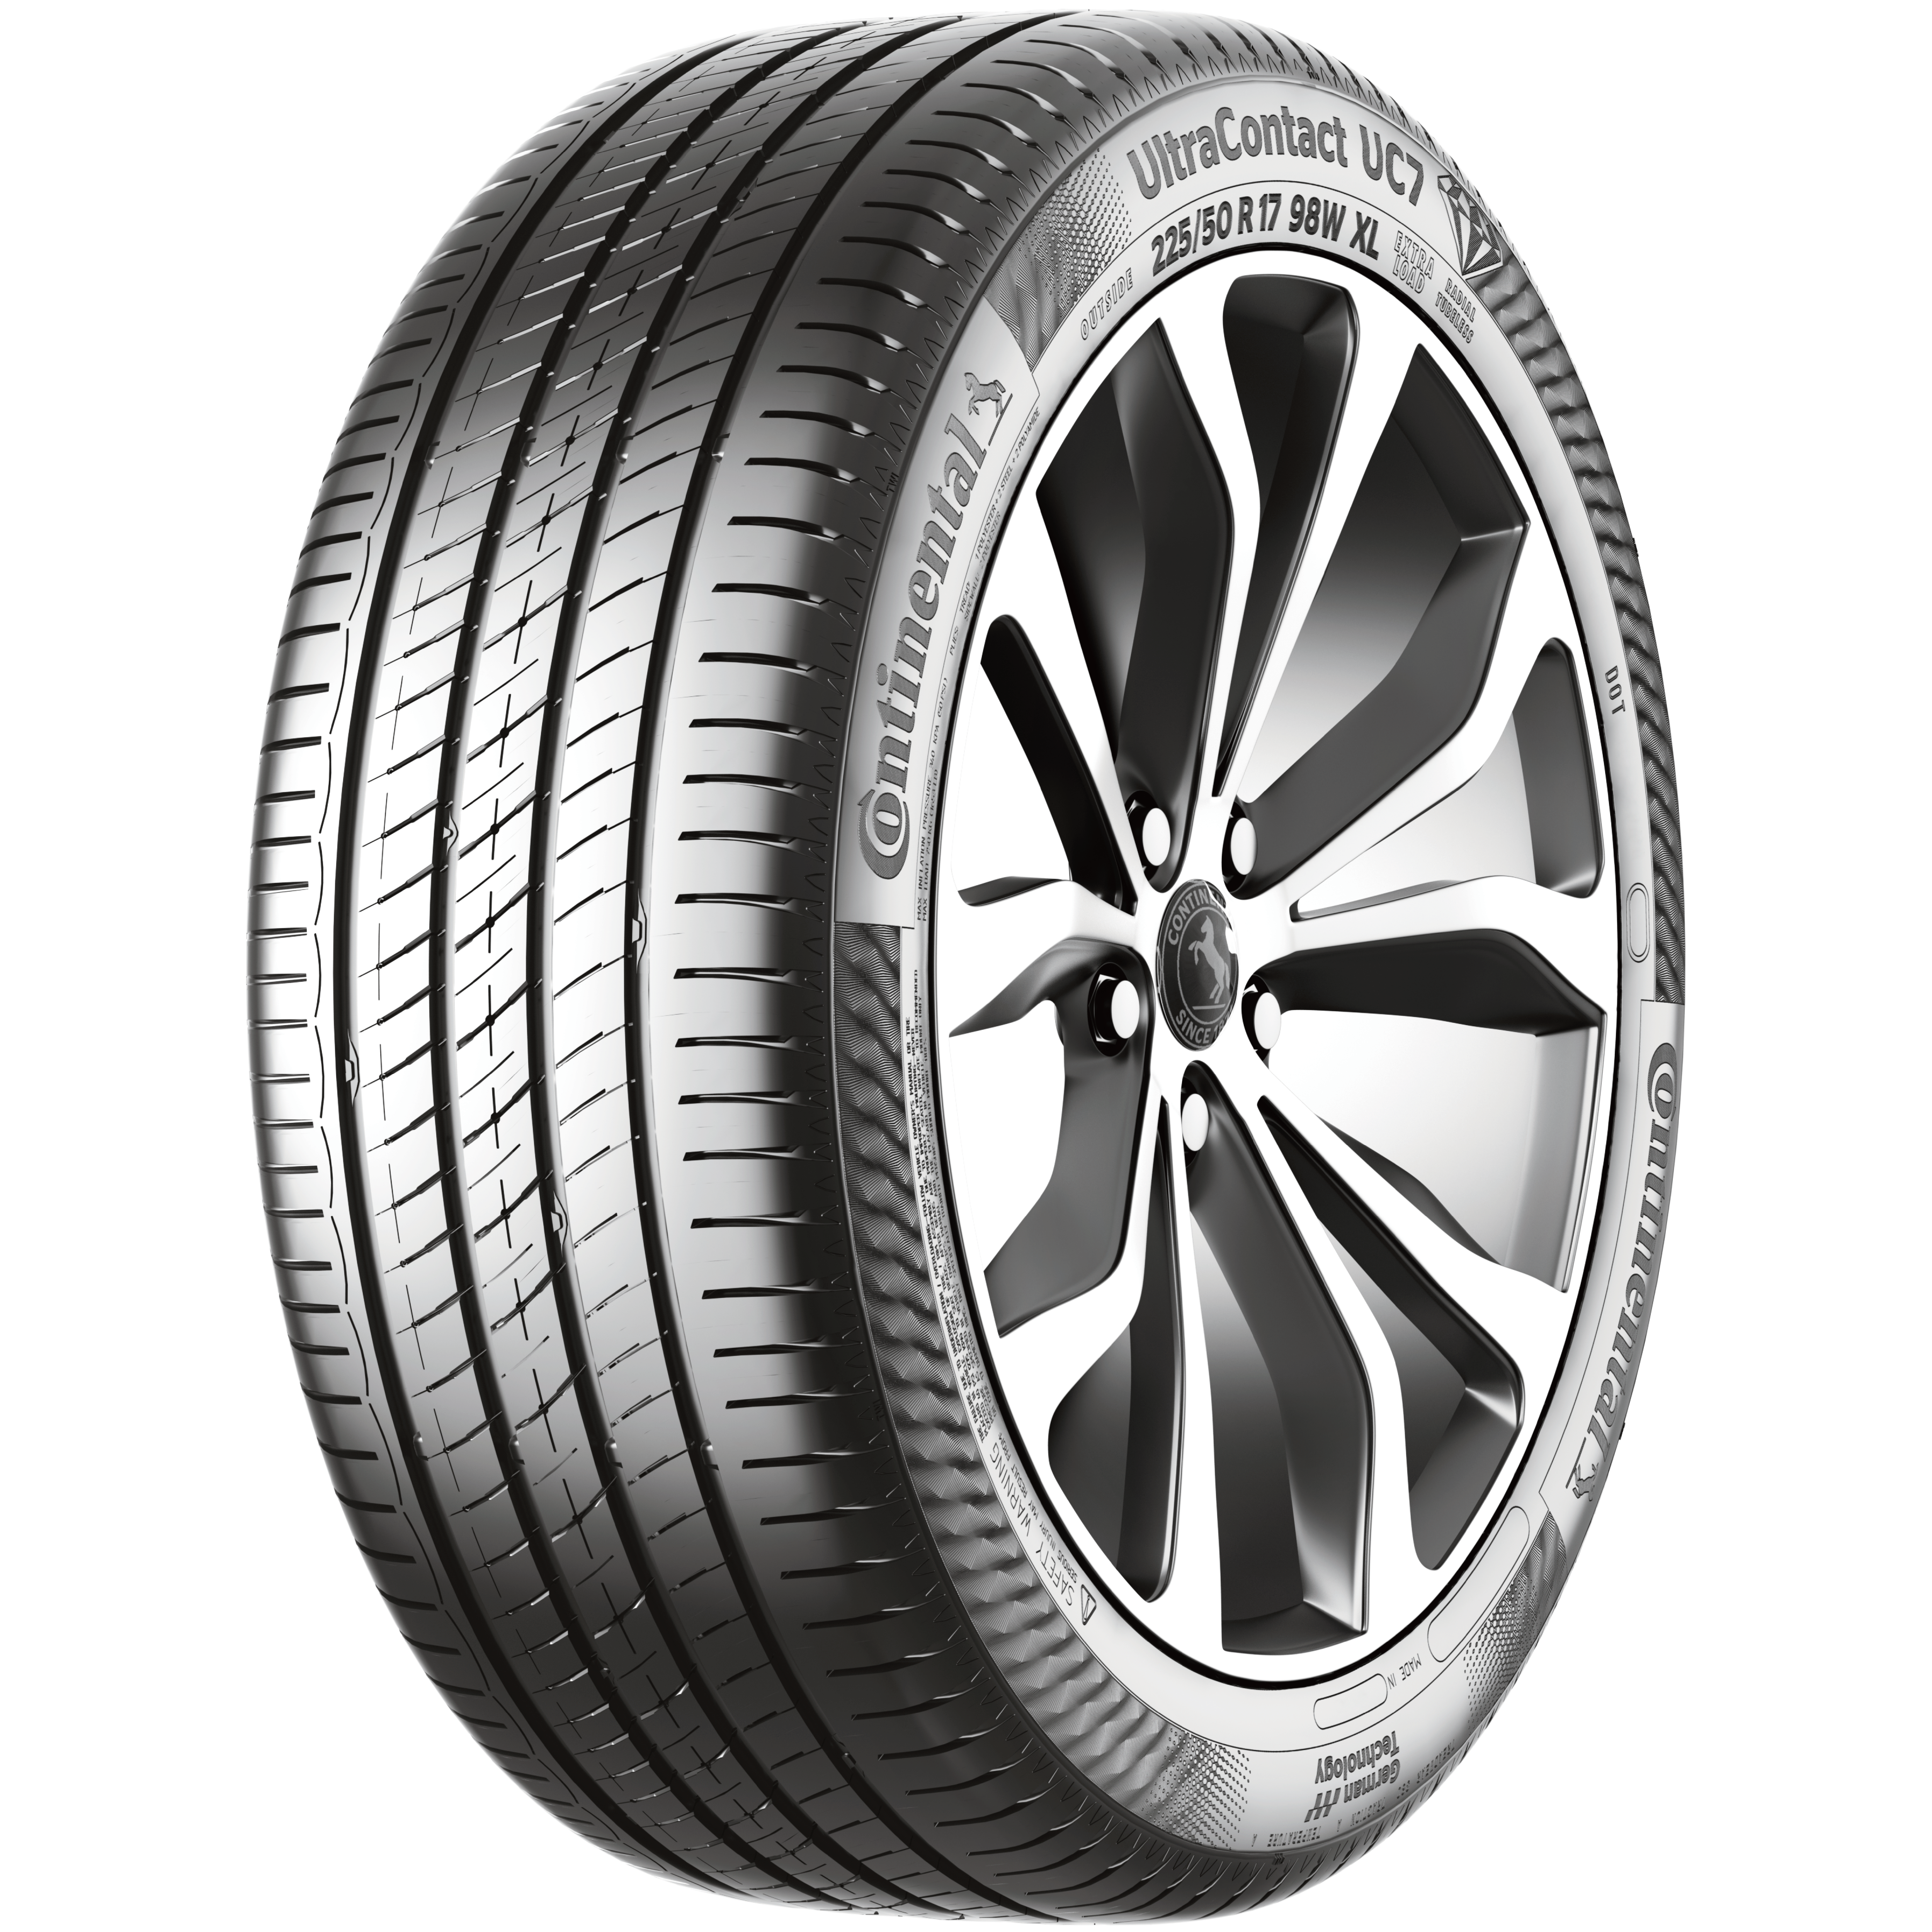 Continental ultracontact uc6. Continental ULTRACONTACT. Continental ULTRACONTACT Tyres. Т Continental Ultra contact 6. Continental ULTRACONTACT uc6 SUV.